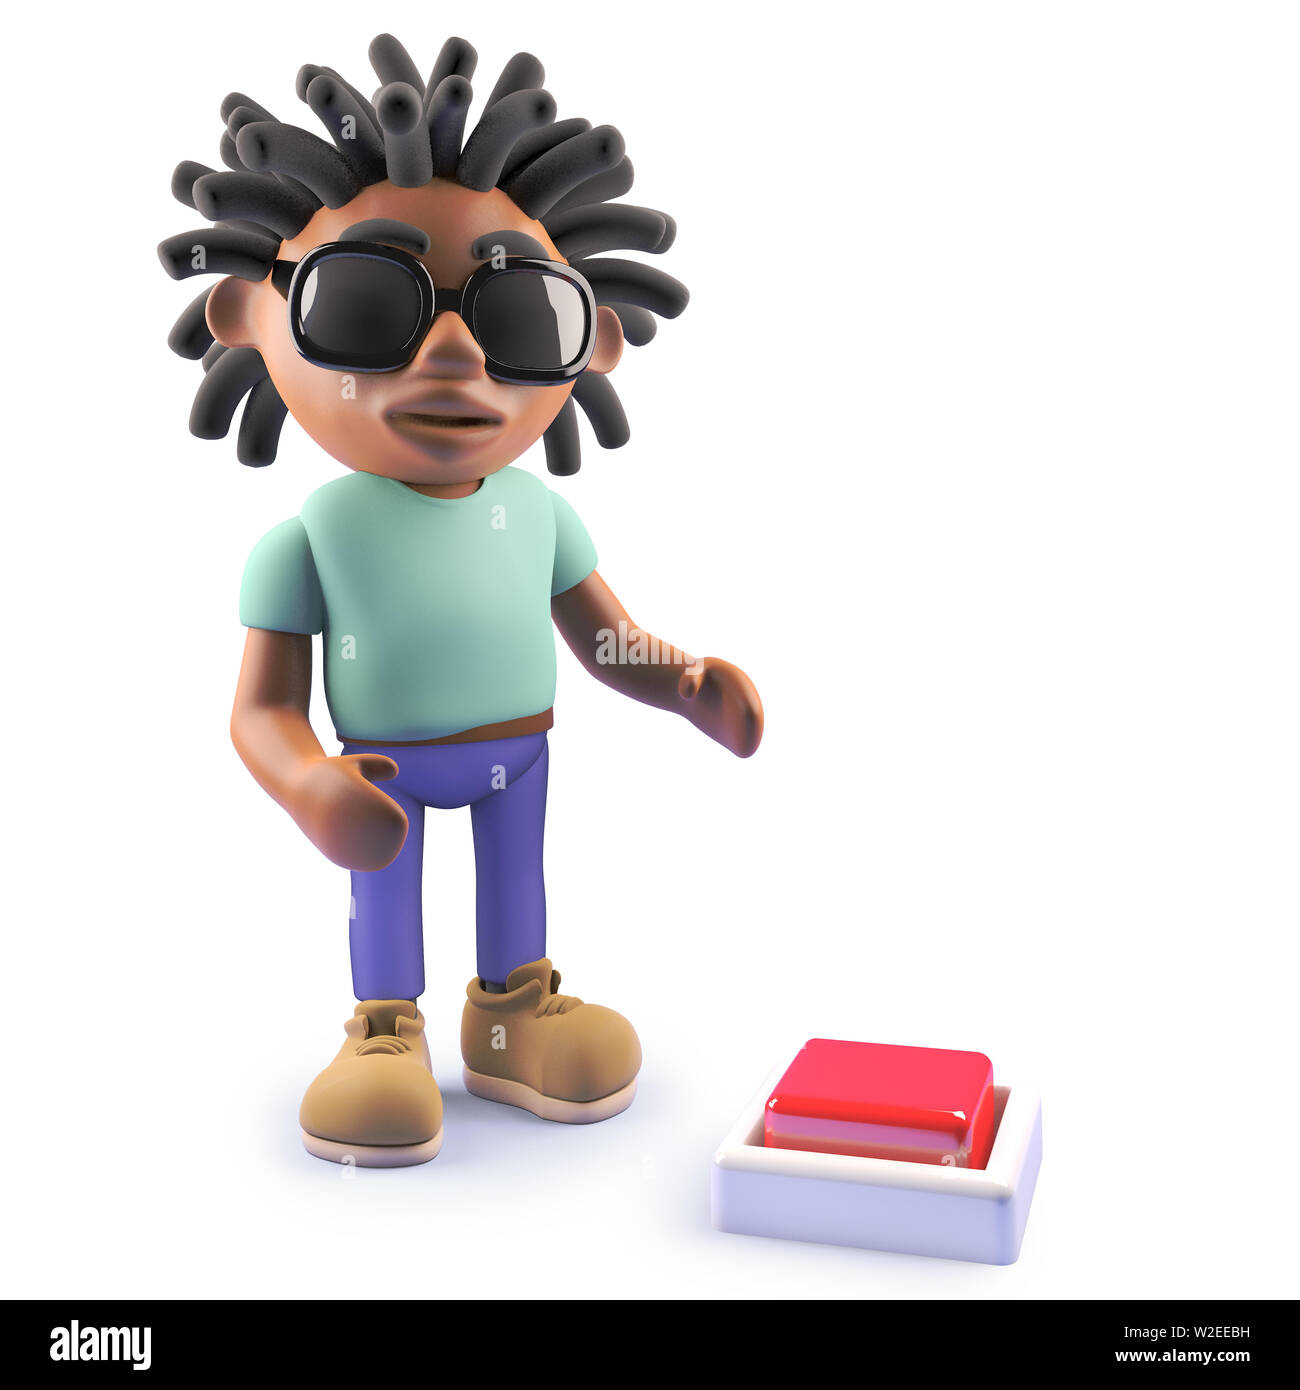 Rendered image of a cool cartoon black rastafarian character looking at a  button, 3d illustration Stock Photo - Alamy